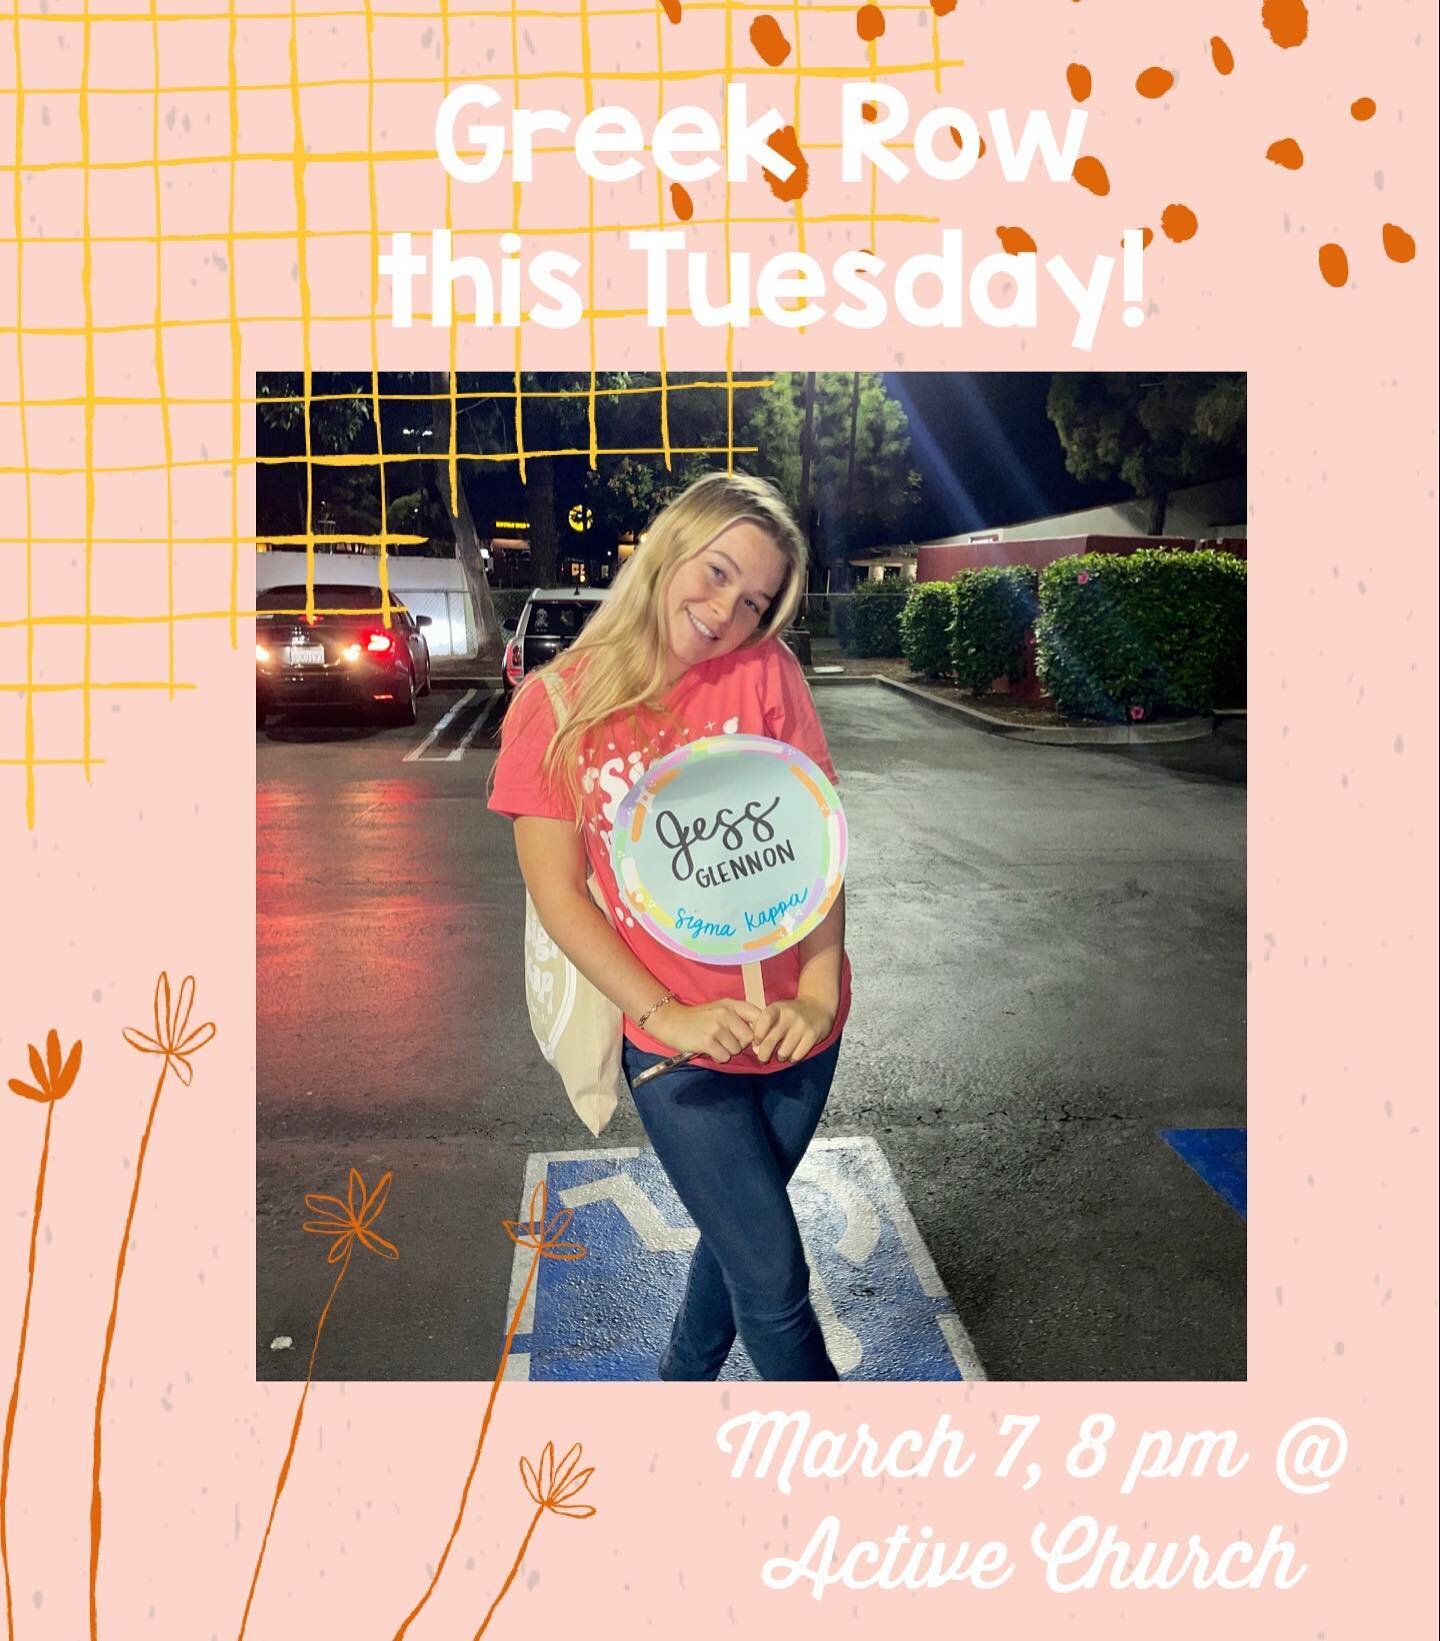 Join us at Greek Row this Tuesday! We will be hearing from 2nd year Sig Kap member, Jessica Glennon! There will be time to meet new people, eat some yummy snacks, and have sweet discussion time. Hope to see new &amp; old faces there :) DM us if you n